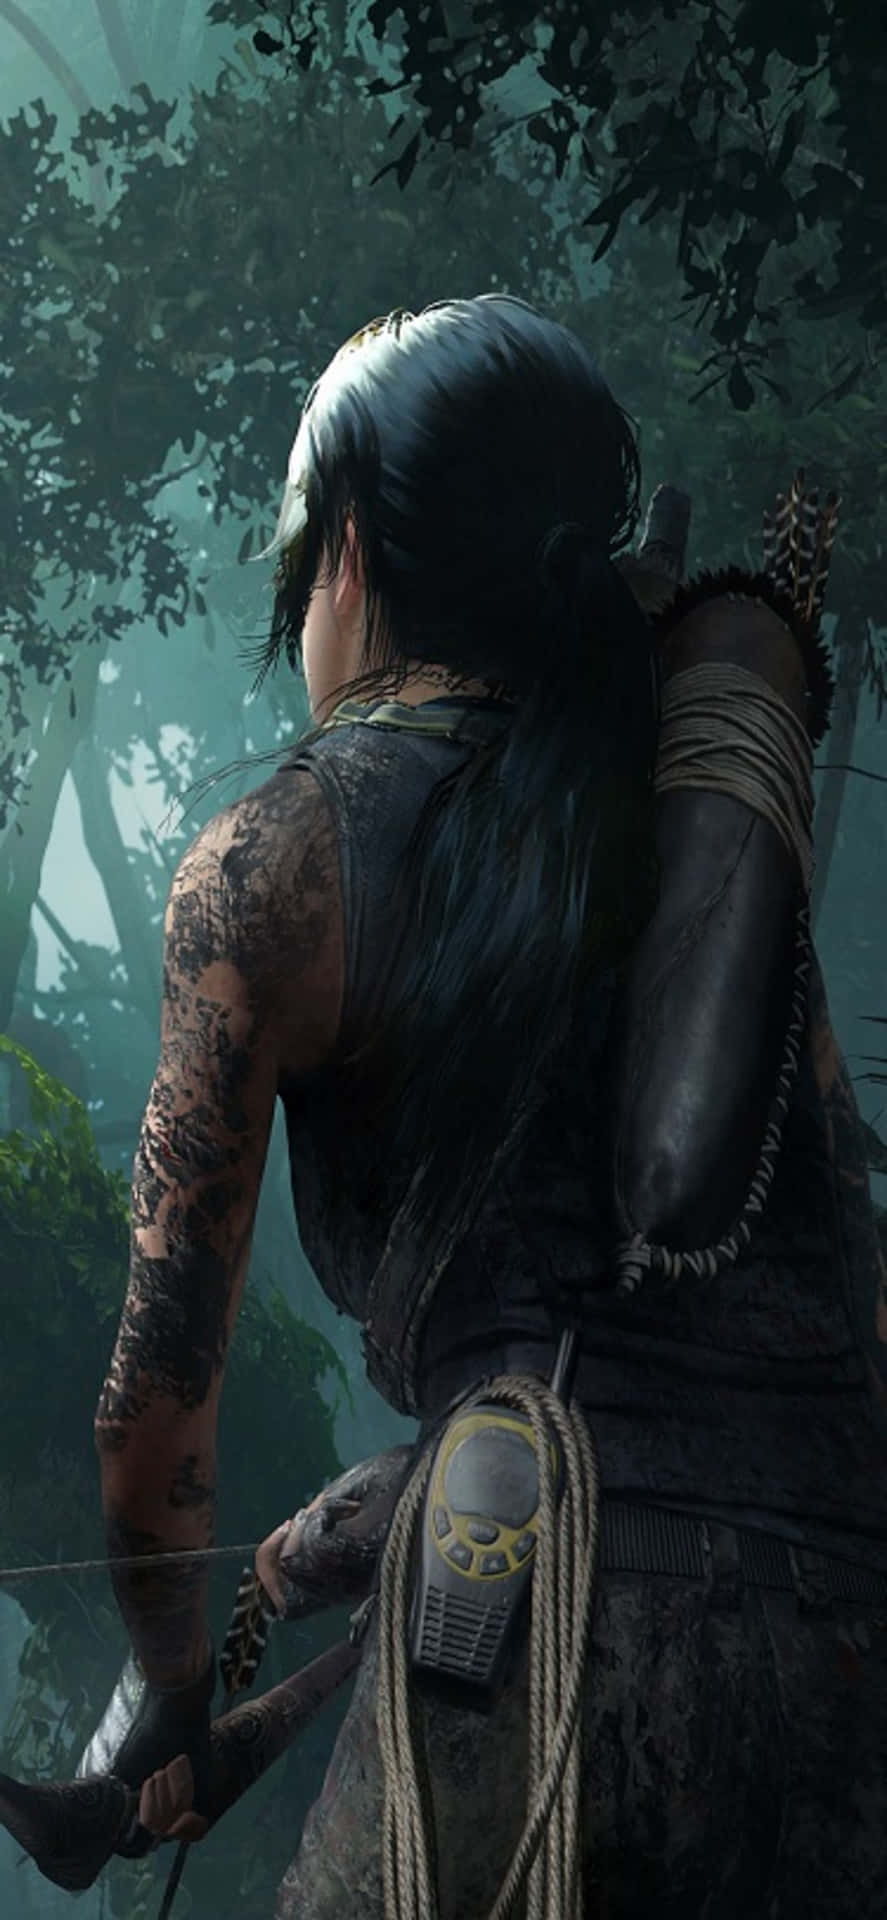 Unlock the secrets of Shadow of the Tomb Raider with an Iphone X.